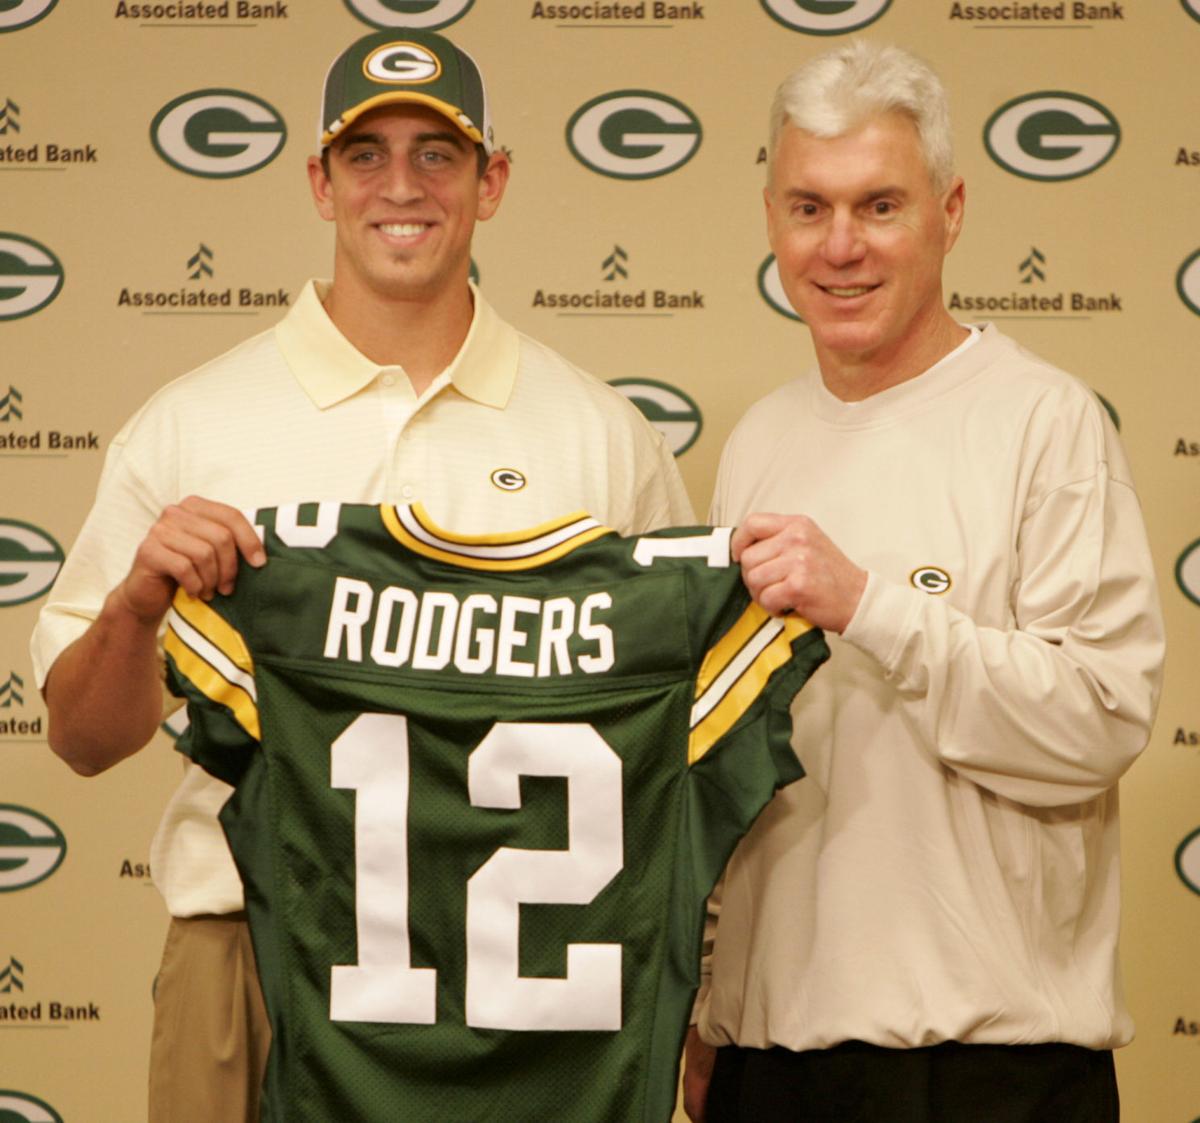 I would like for the Packer fans to think the Packers are in good hands&#39; —  As GM, underappreciated Ted Thompson delivered on that hope | Pro football  | madison.com